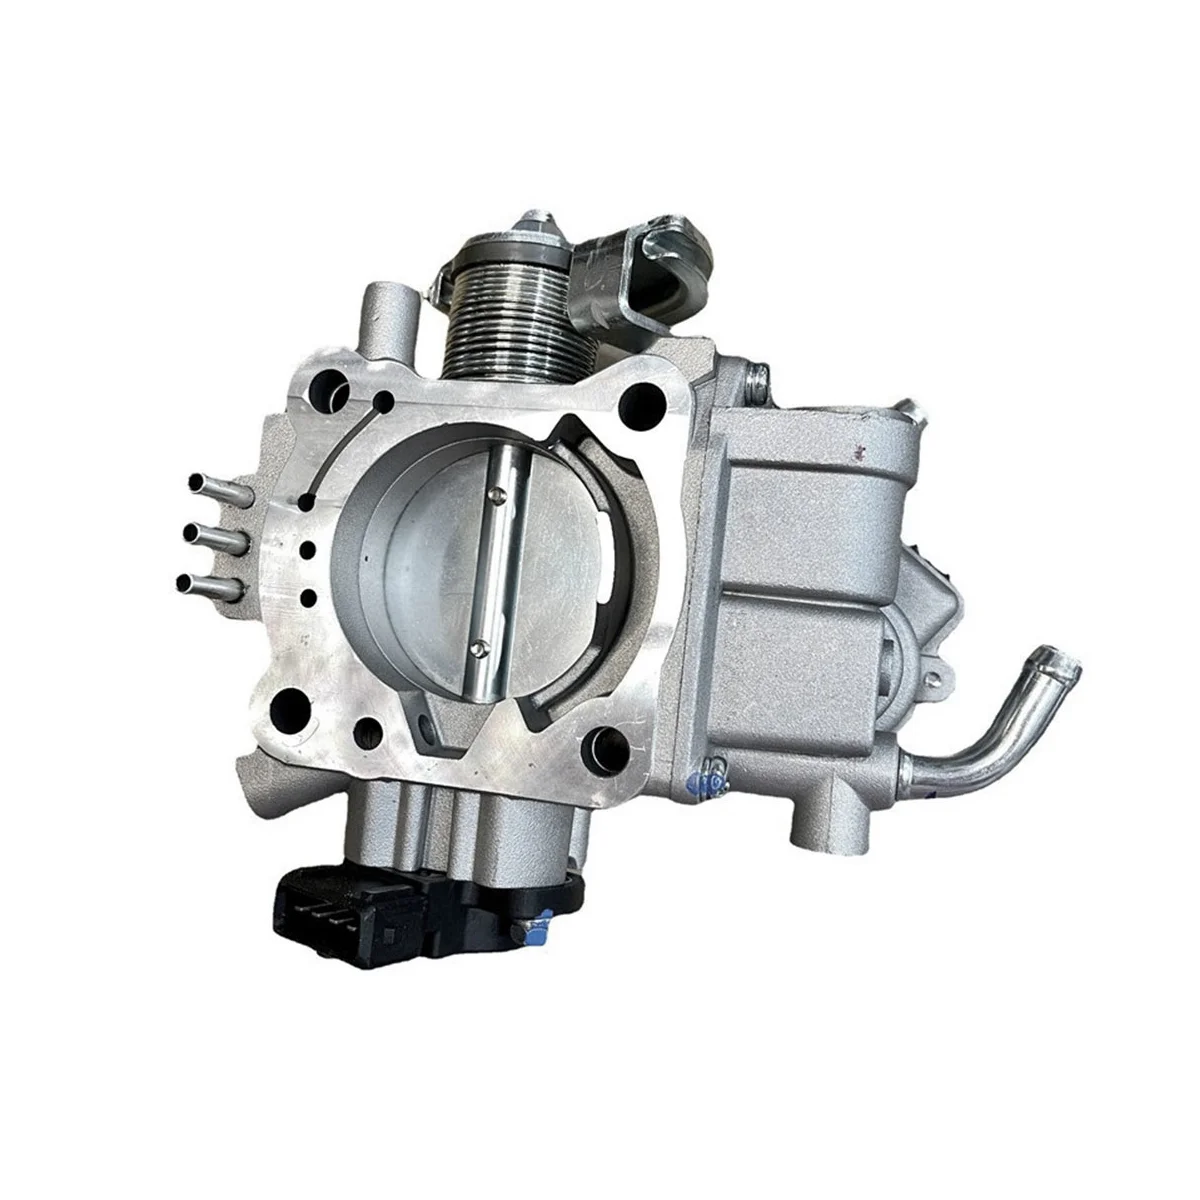 Auto Throttle Body embly for  Galant 2.0L 2WD Engine Code 4G64 4G63 MR579011 MD3 - £360.22 GBP